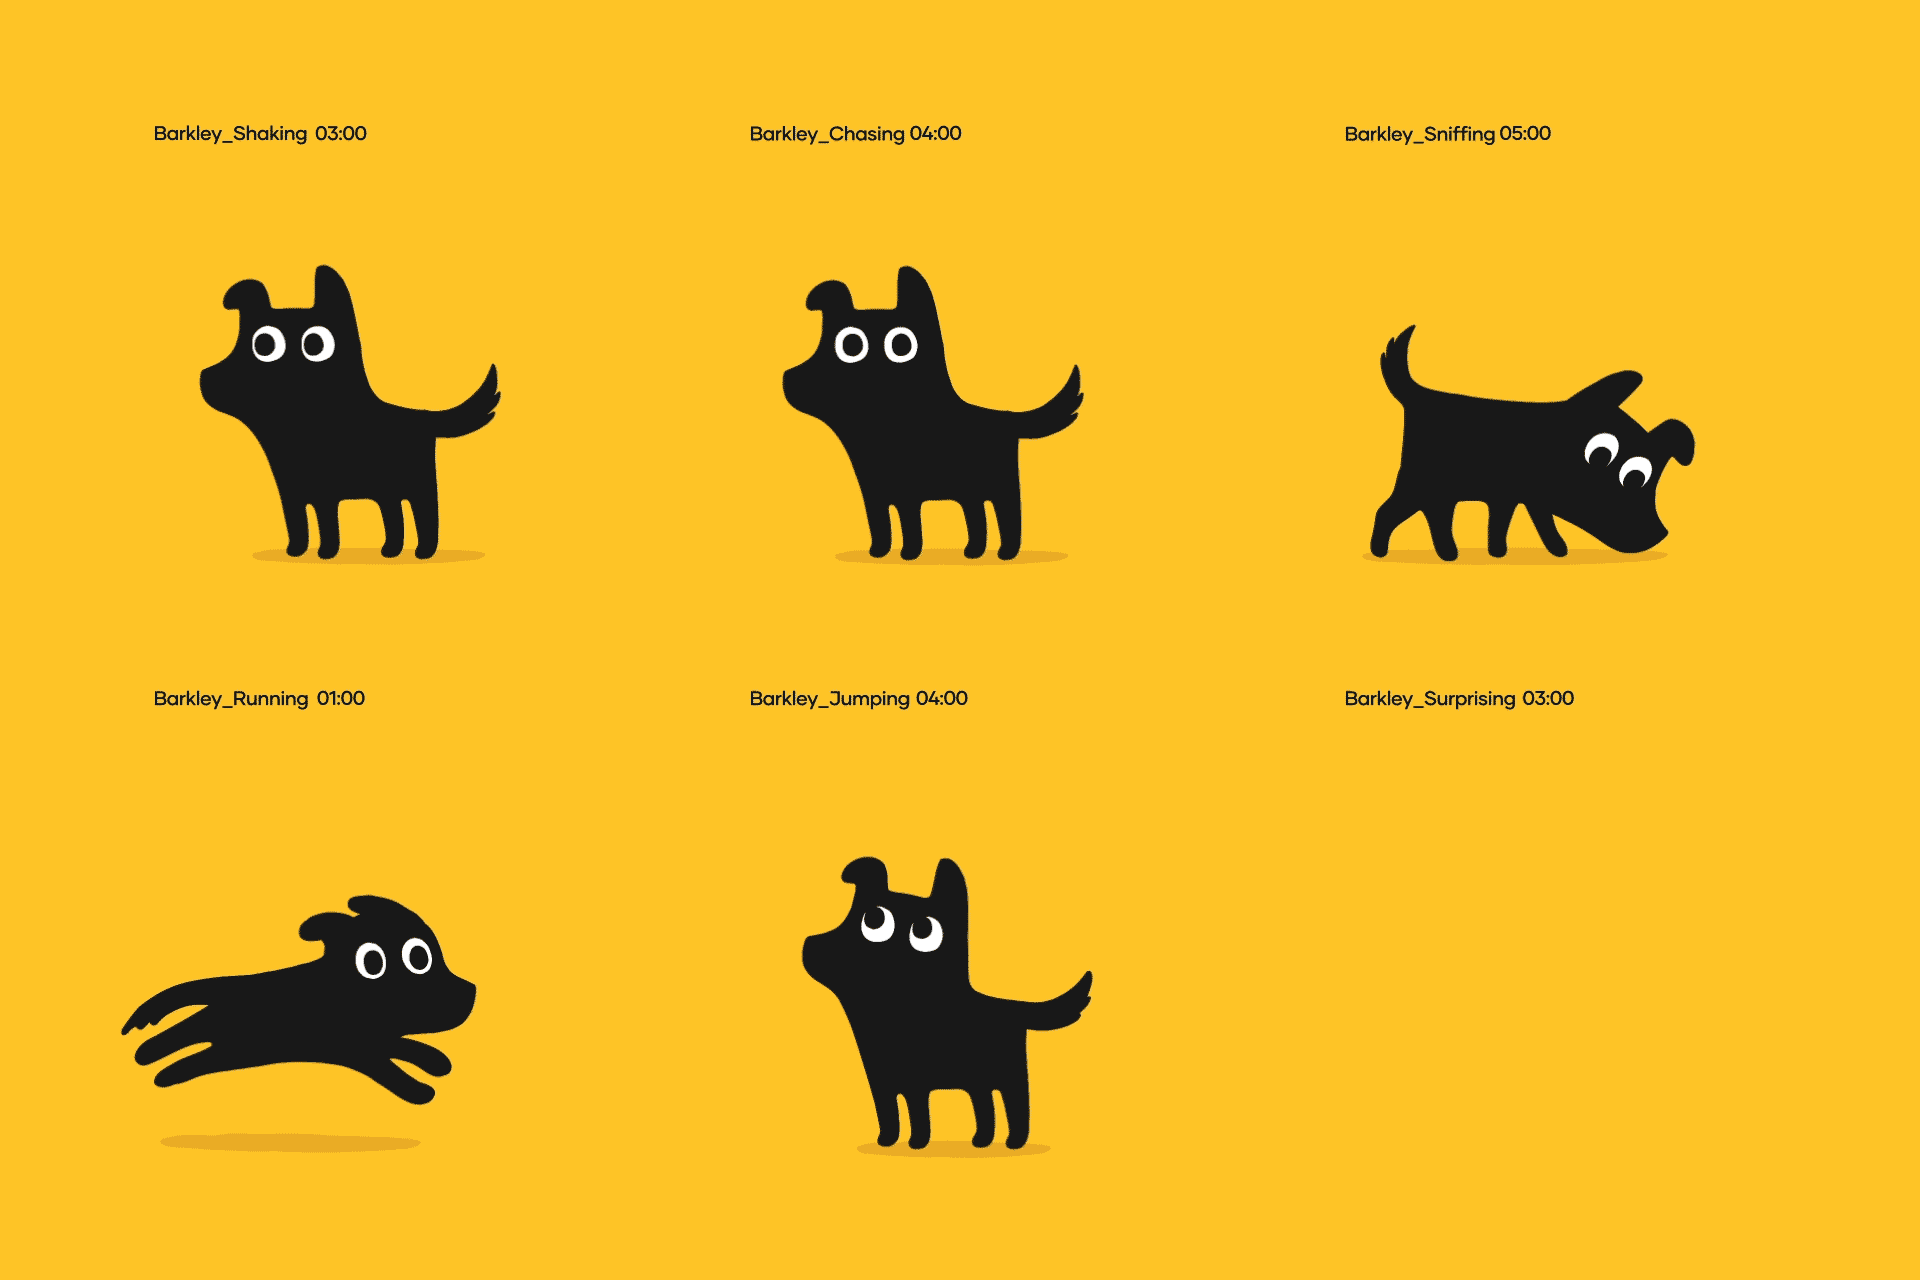 New Identity for Petbarn by Landor